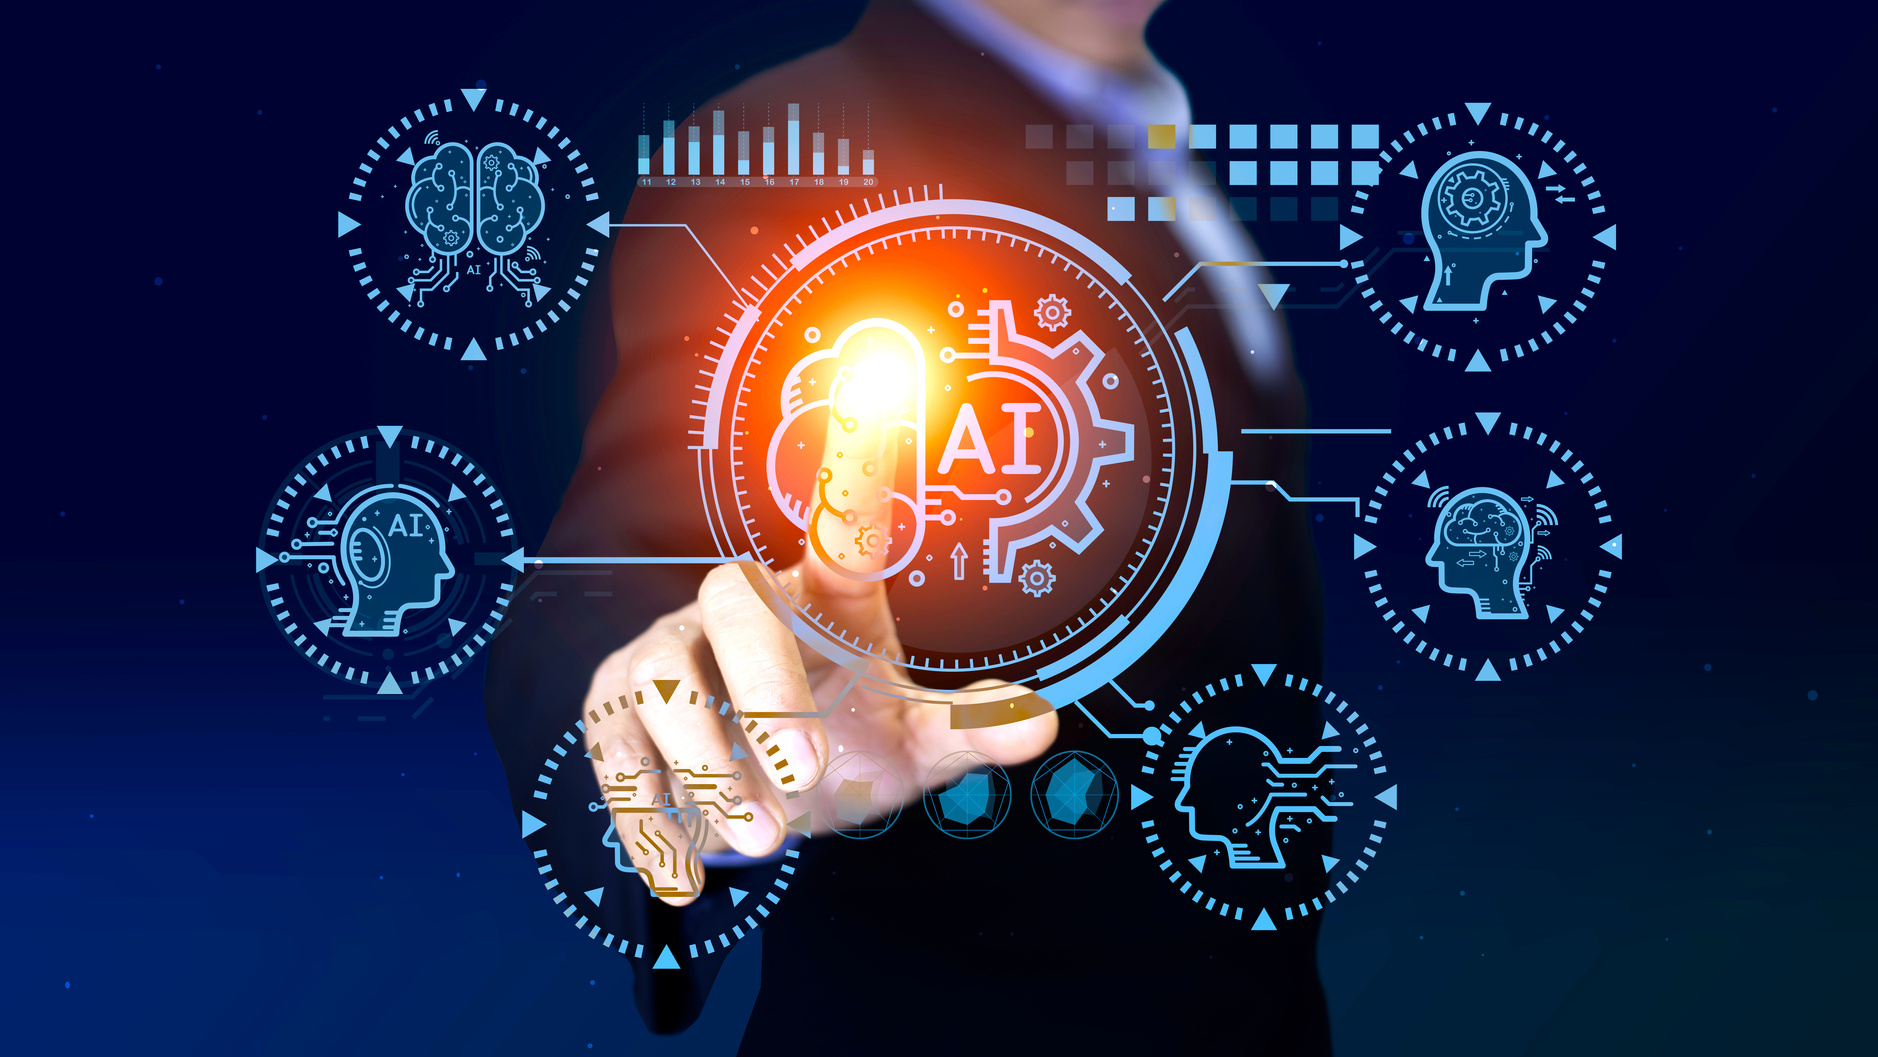 AI (Artificial Intelligence) Technology networks connecting wireless devices. AI technology is essential to business in the digital world. Futuristic virtual screen interface technology.